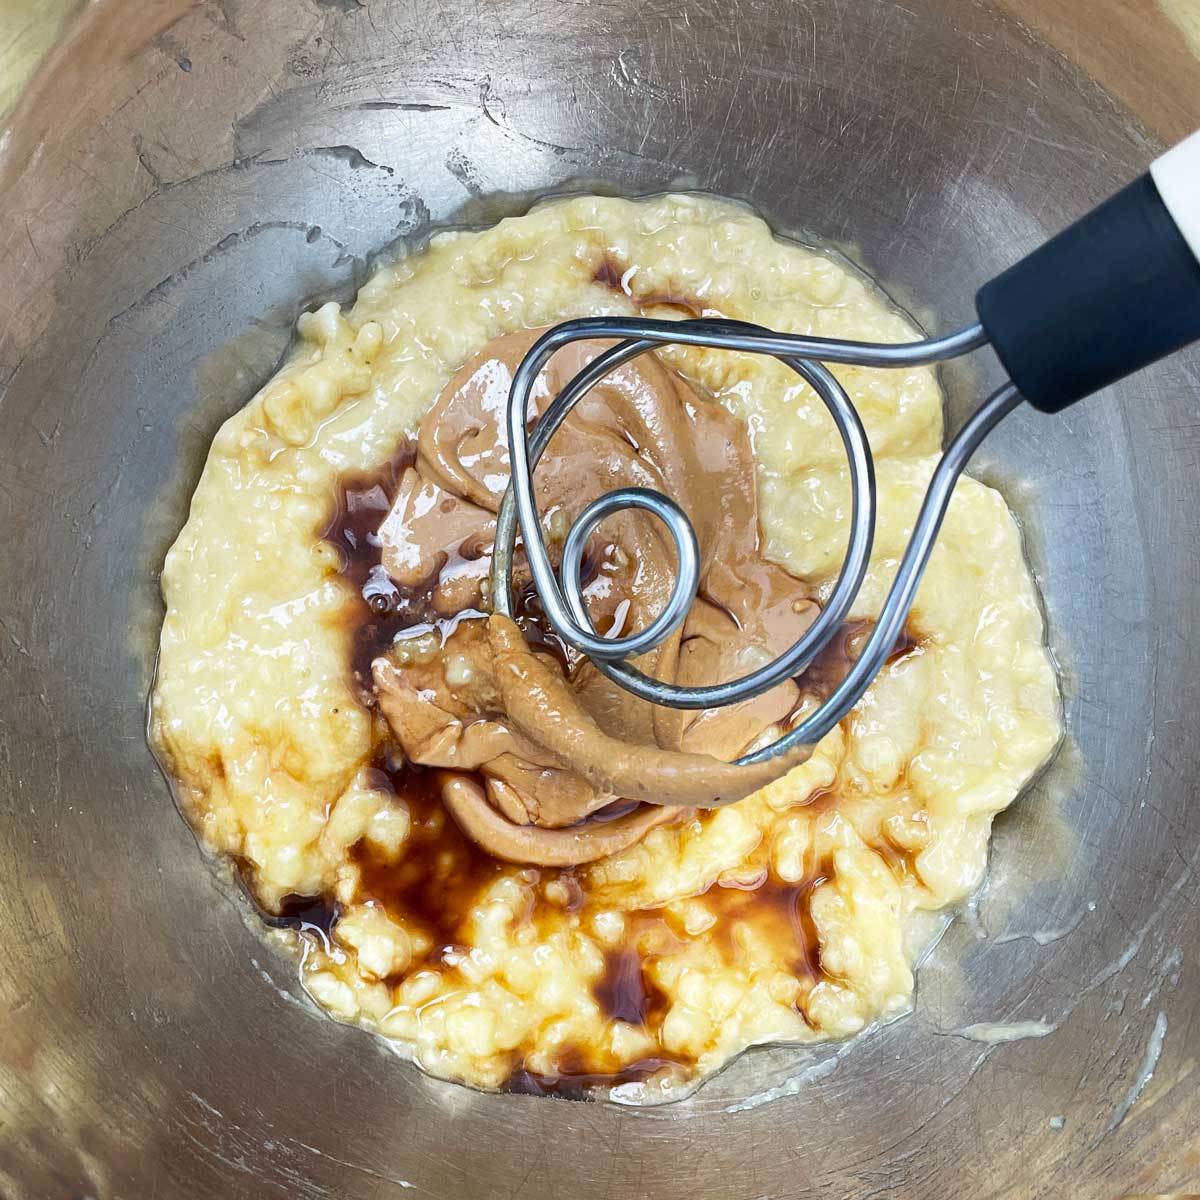 Mashed bananas, Cashew butter and vanilla extract in a bowl